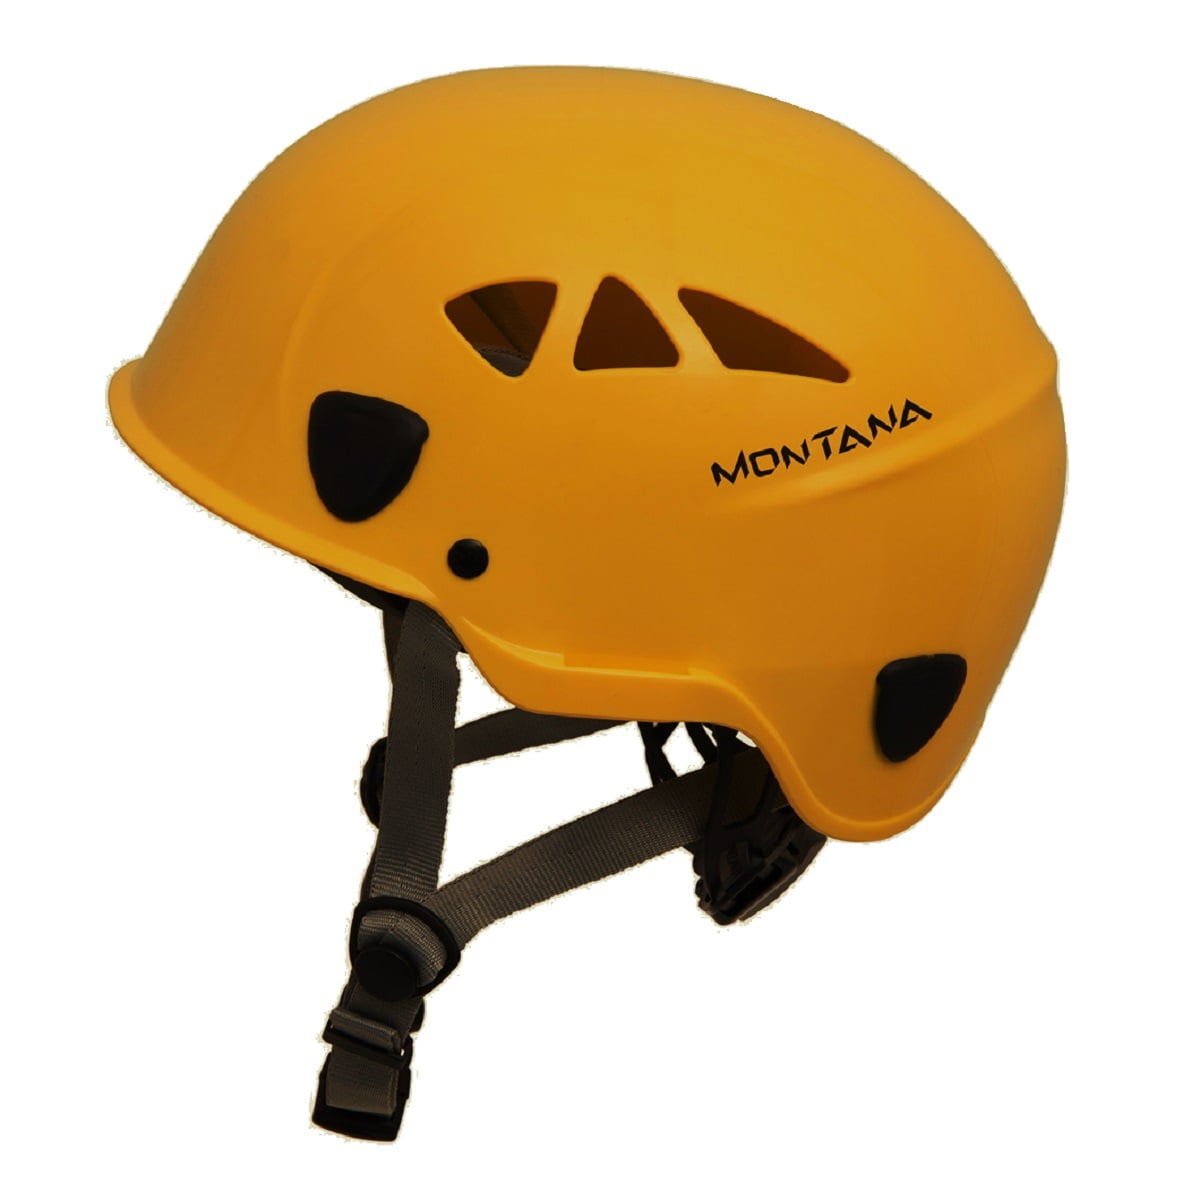 Capacete Ares ABS Laranja - Classe A, TIPO III, CA 32260 (Uso geral)